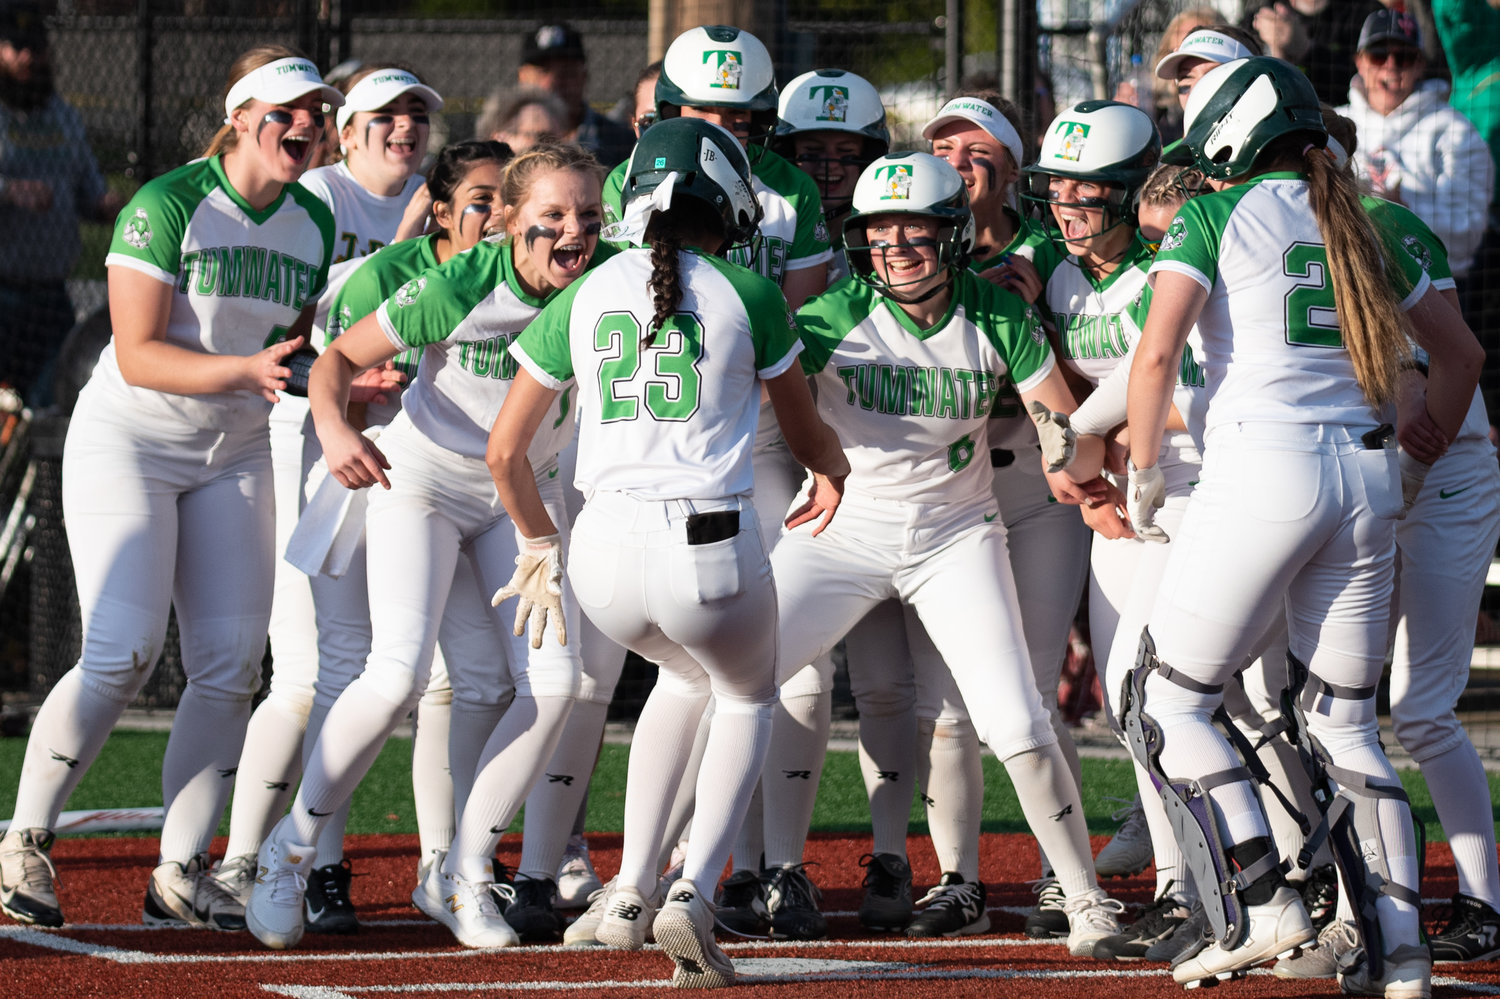 Tumwater's Jaylene Manriquez (23) is greeted by her teammates at home plate after hitting a two-run home run in the sixth inning against W.F. West in the 2A District 4 championship game at Rec Park May 20.